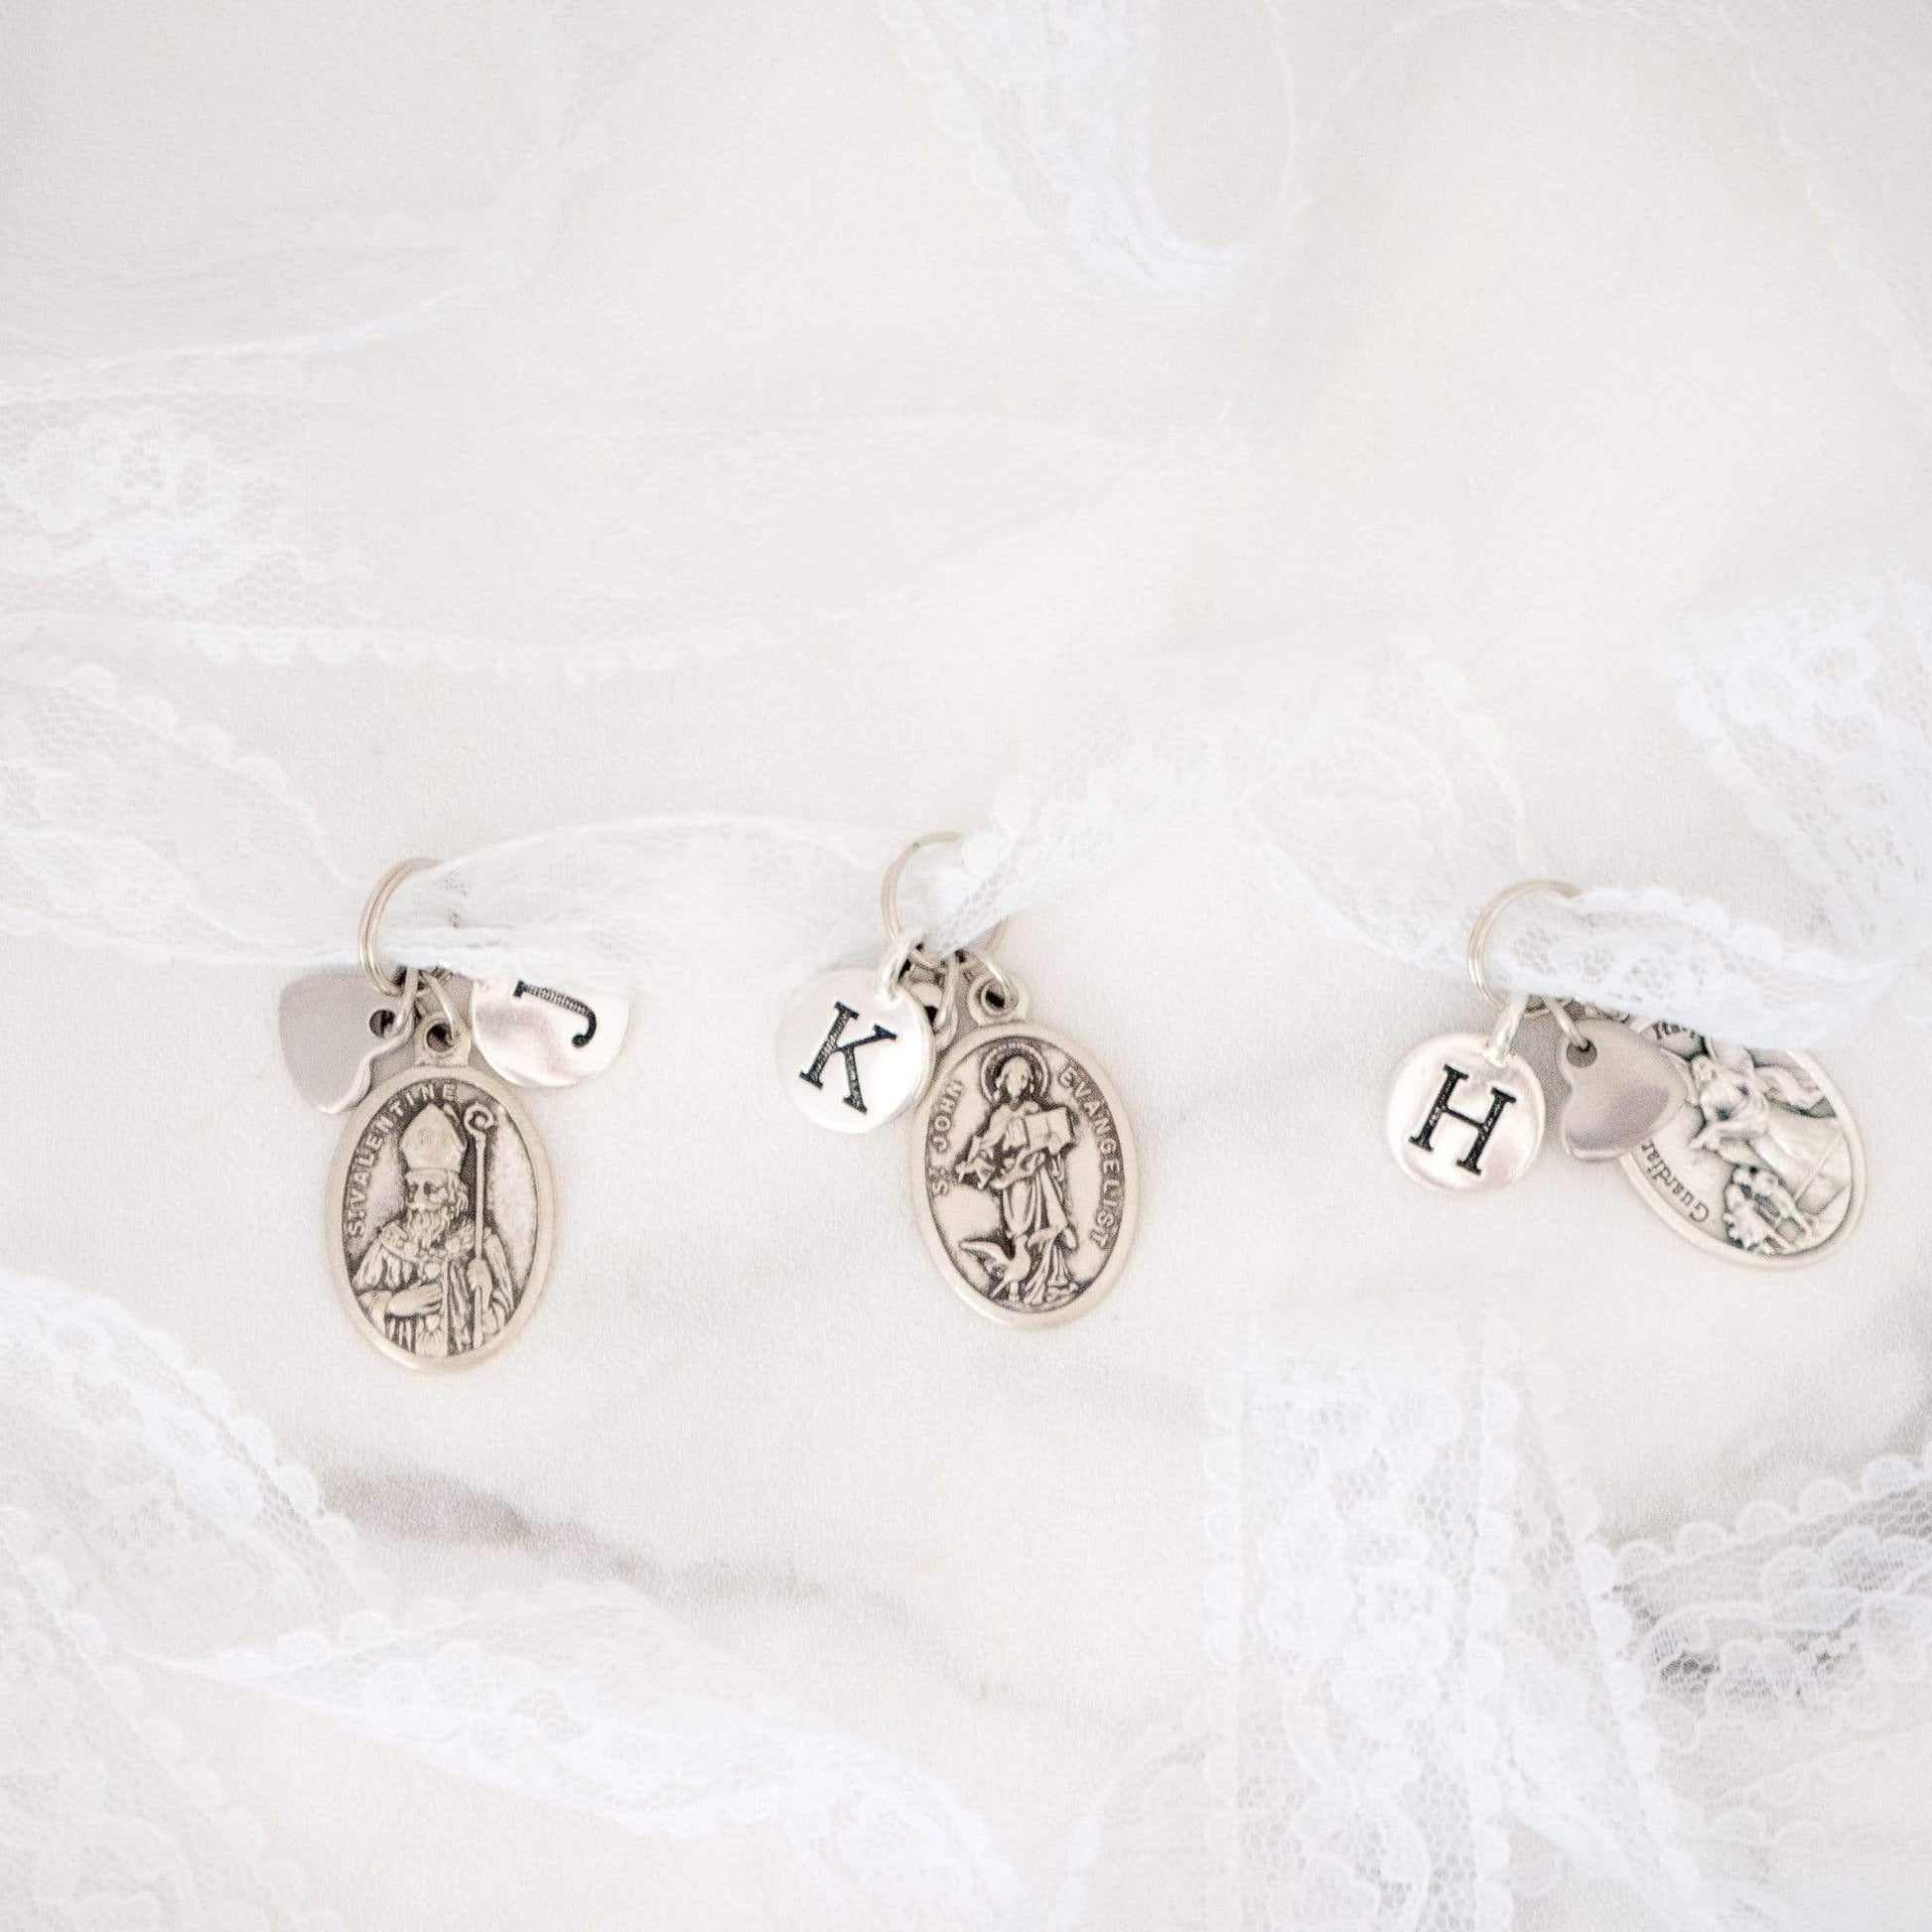 crystal-jewellery-for-gifts WEDDING CHARMS | Bride